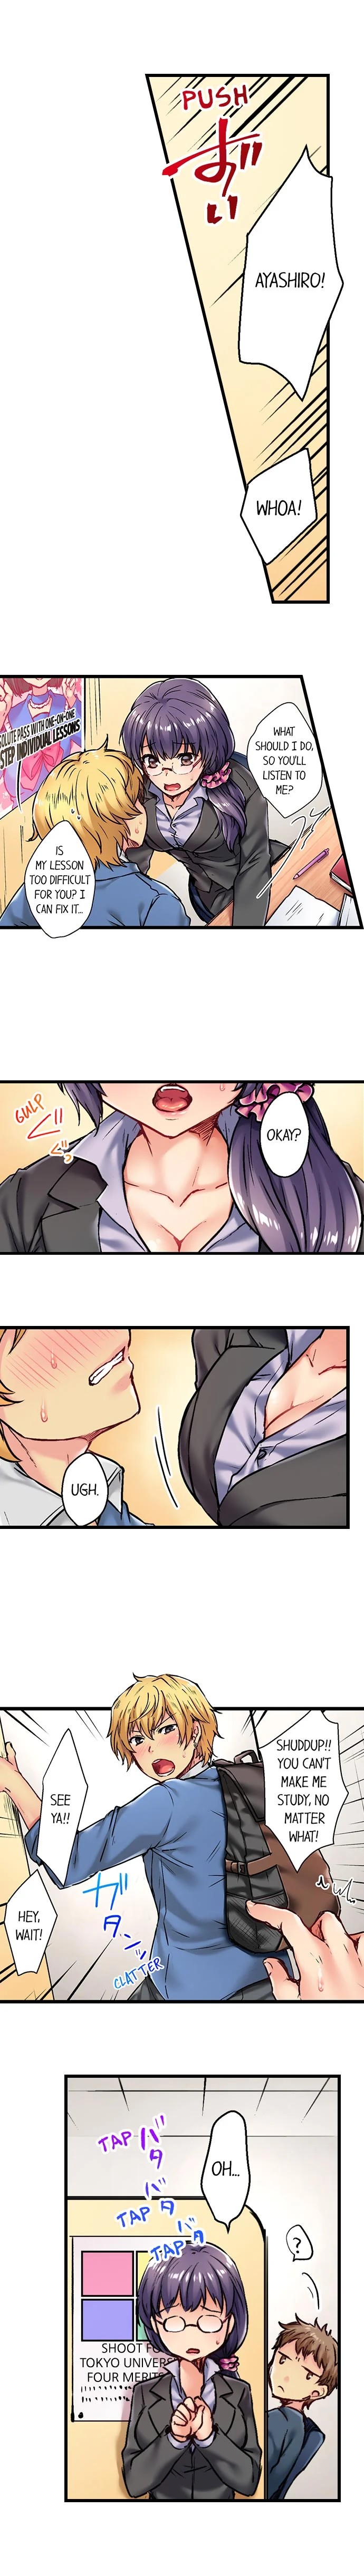 Rewarding My Student With Sex - Chapter 1 Page 3